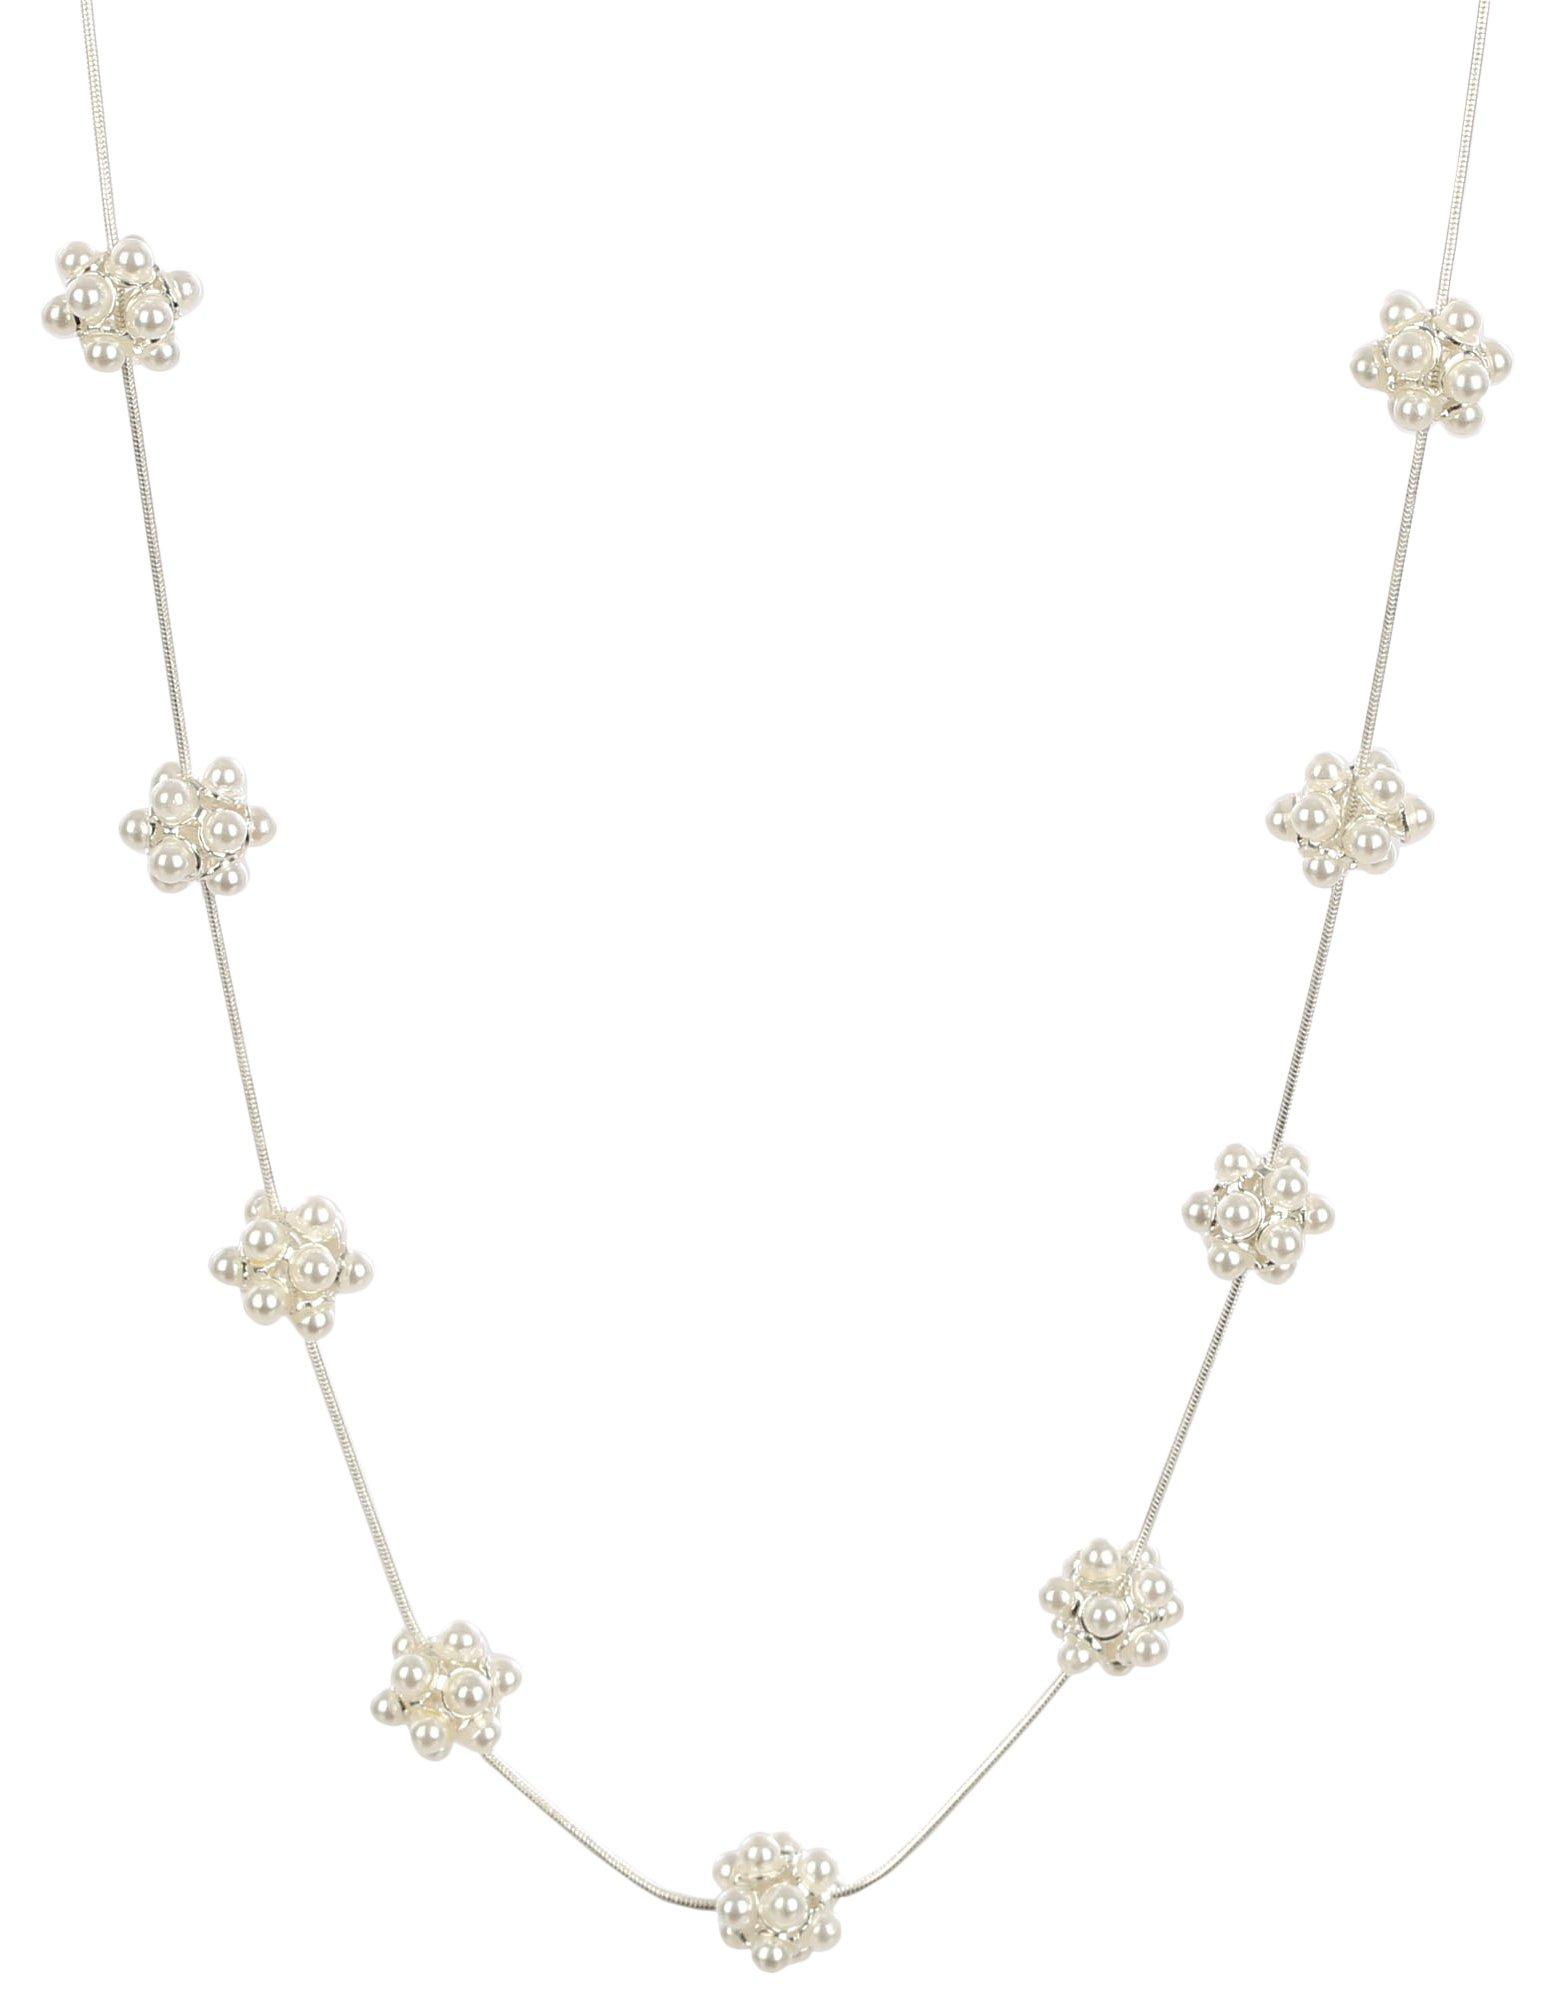 You're Invited 16 In. Faux Pearl Frontal Chain Necklace